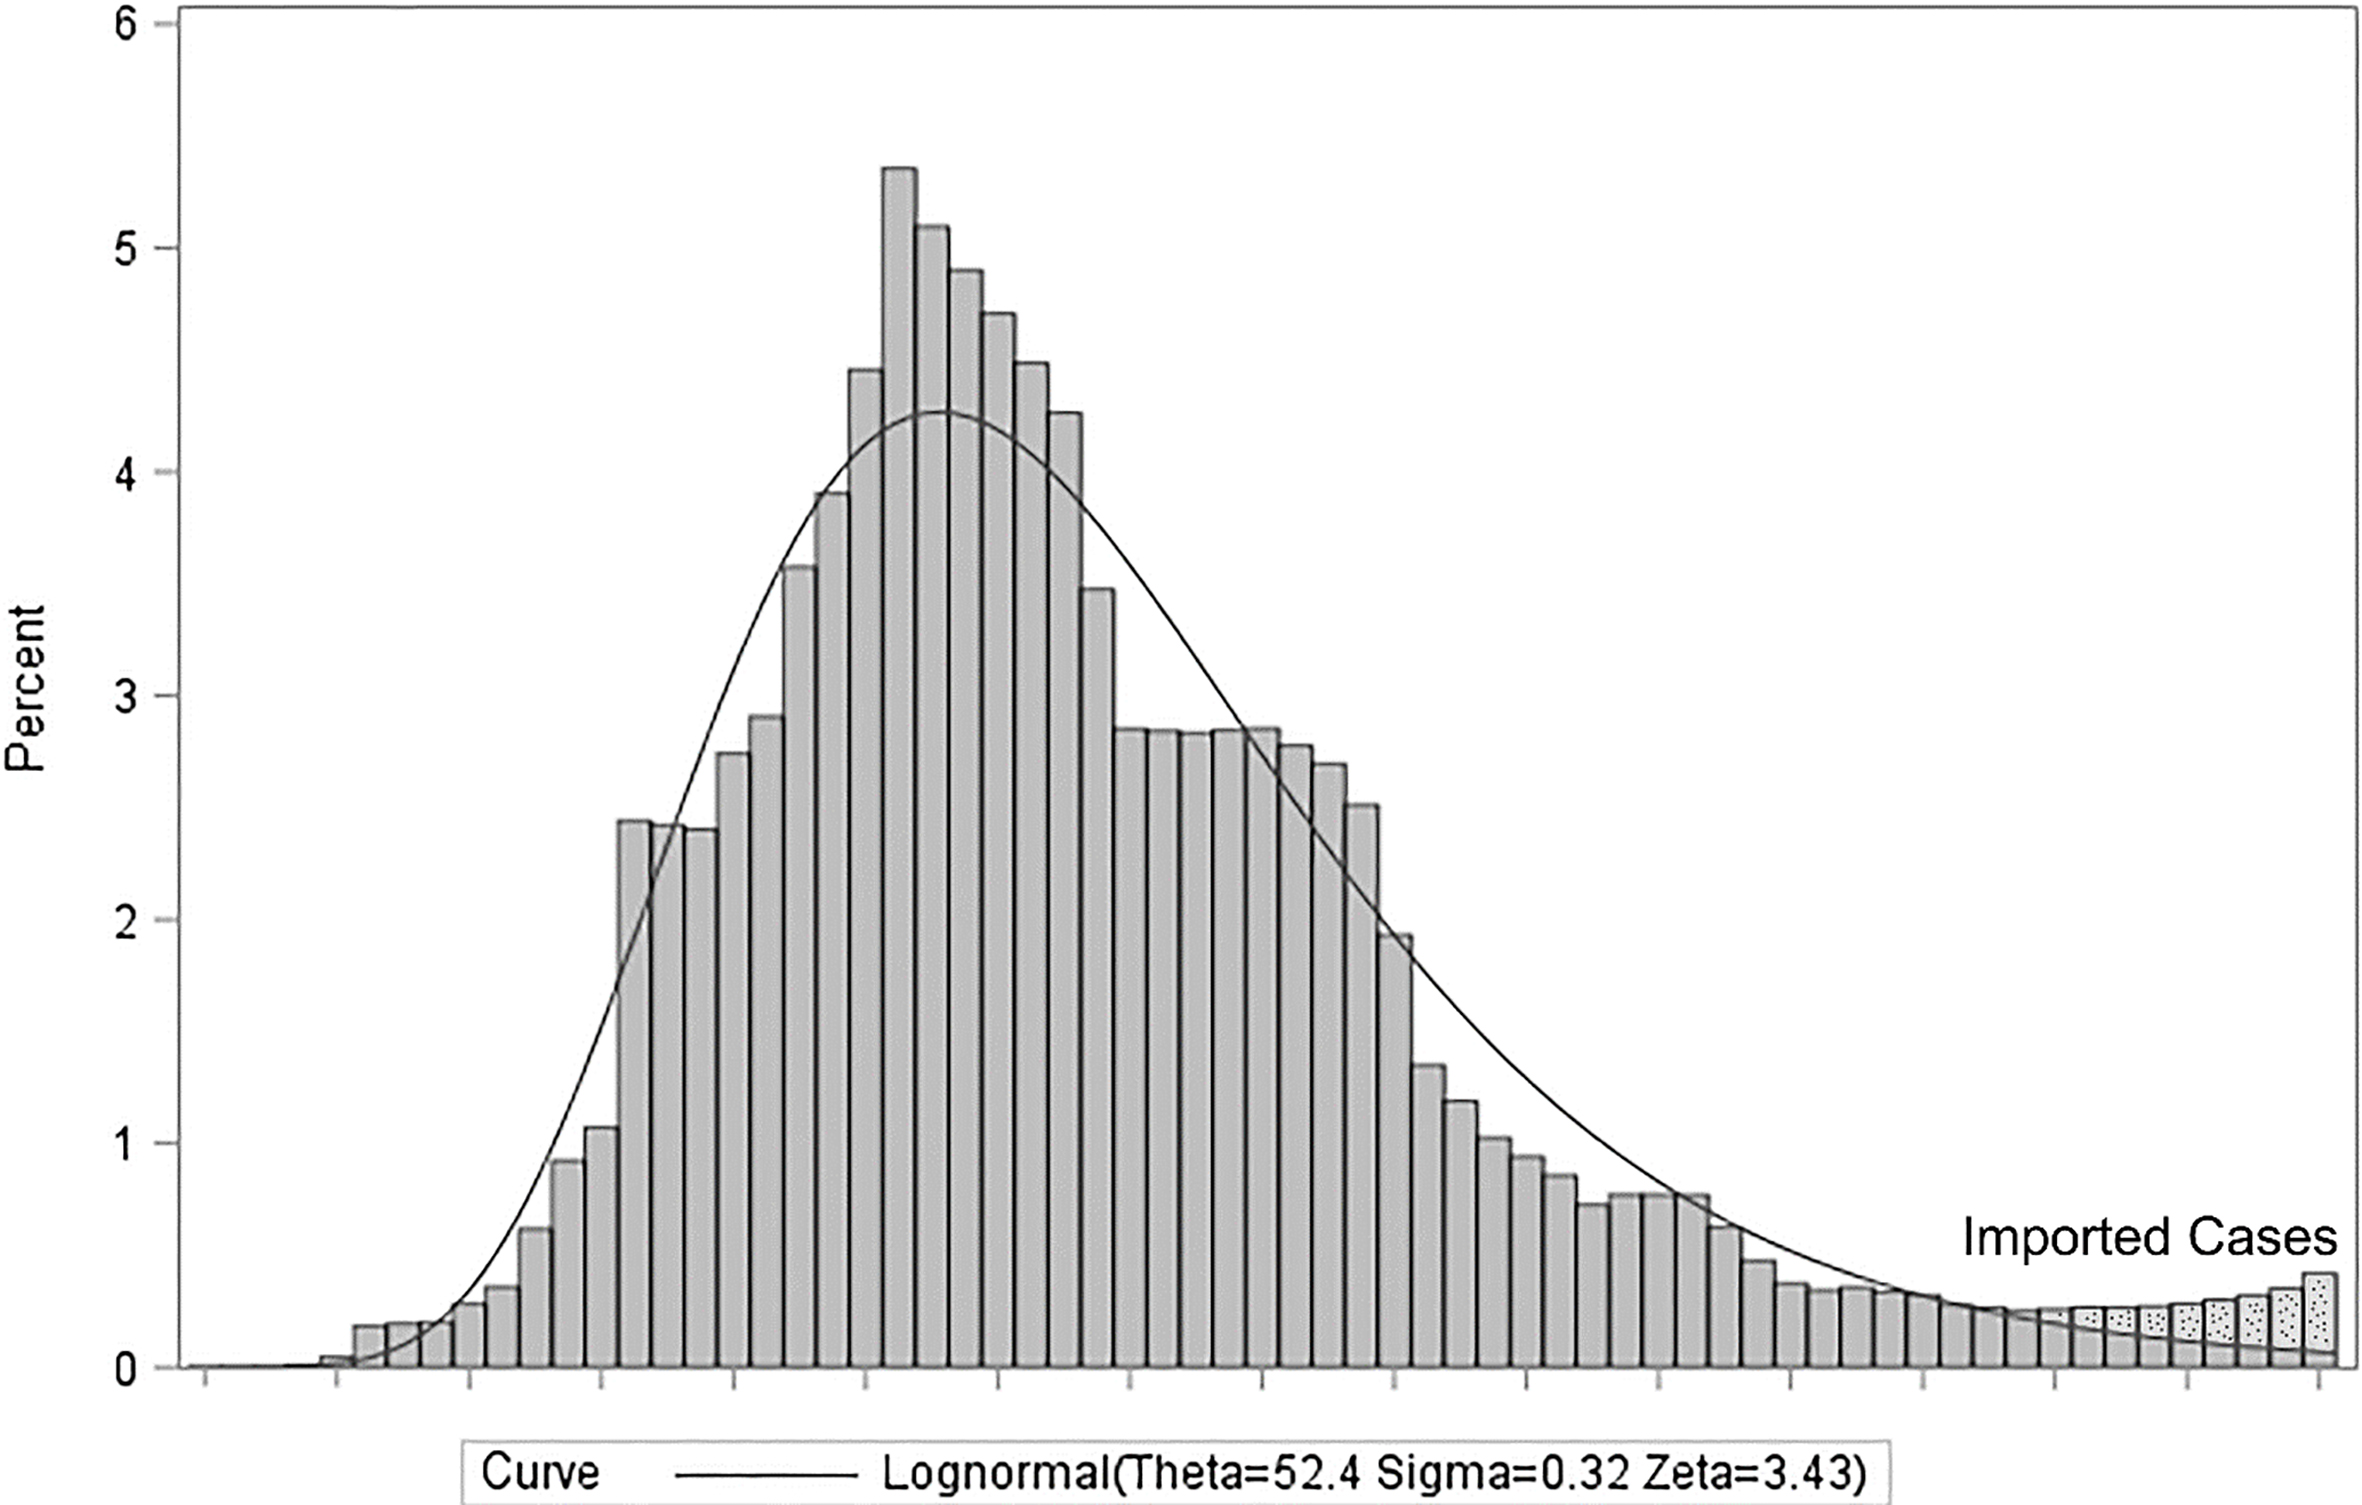 The Lognormal distribution for attributed new confirmed cases in China.